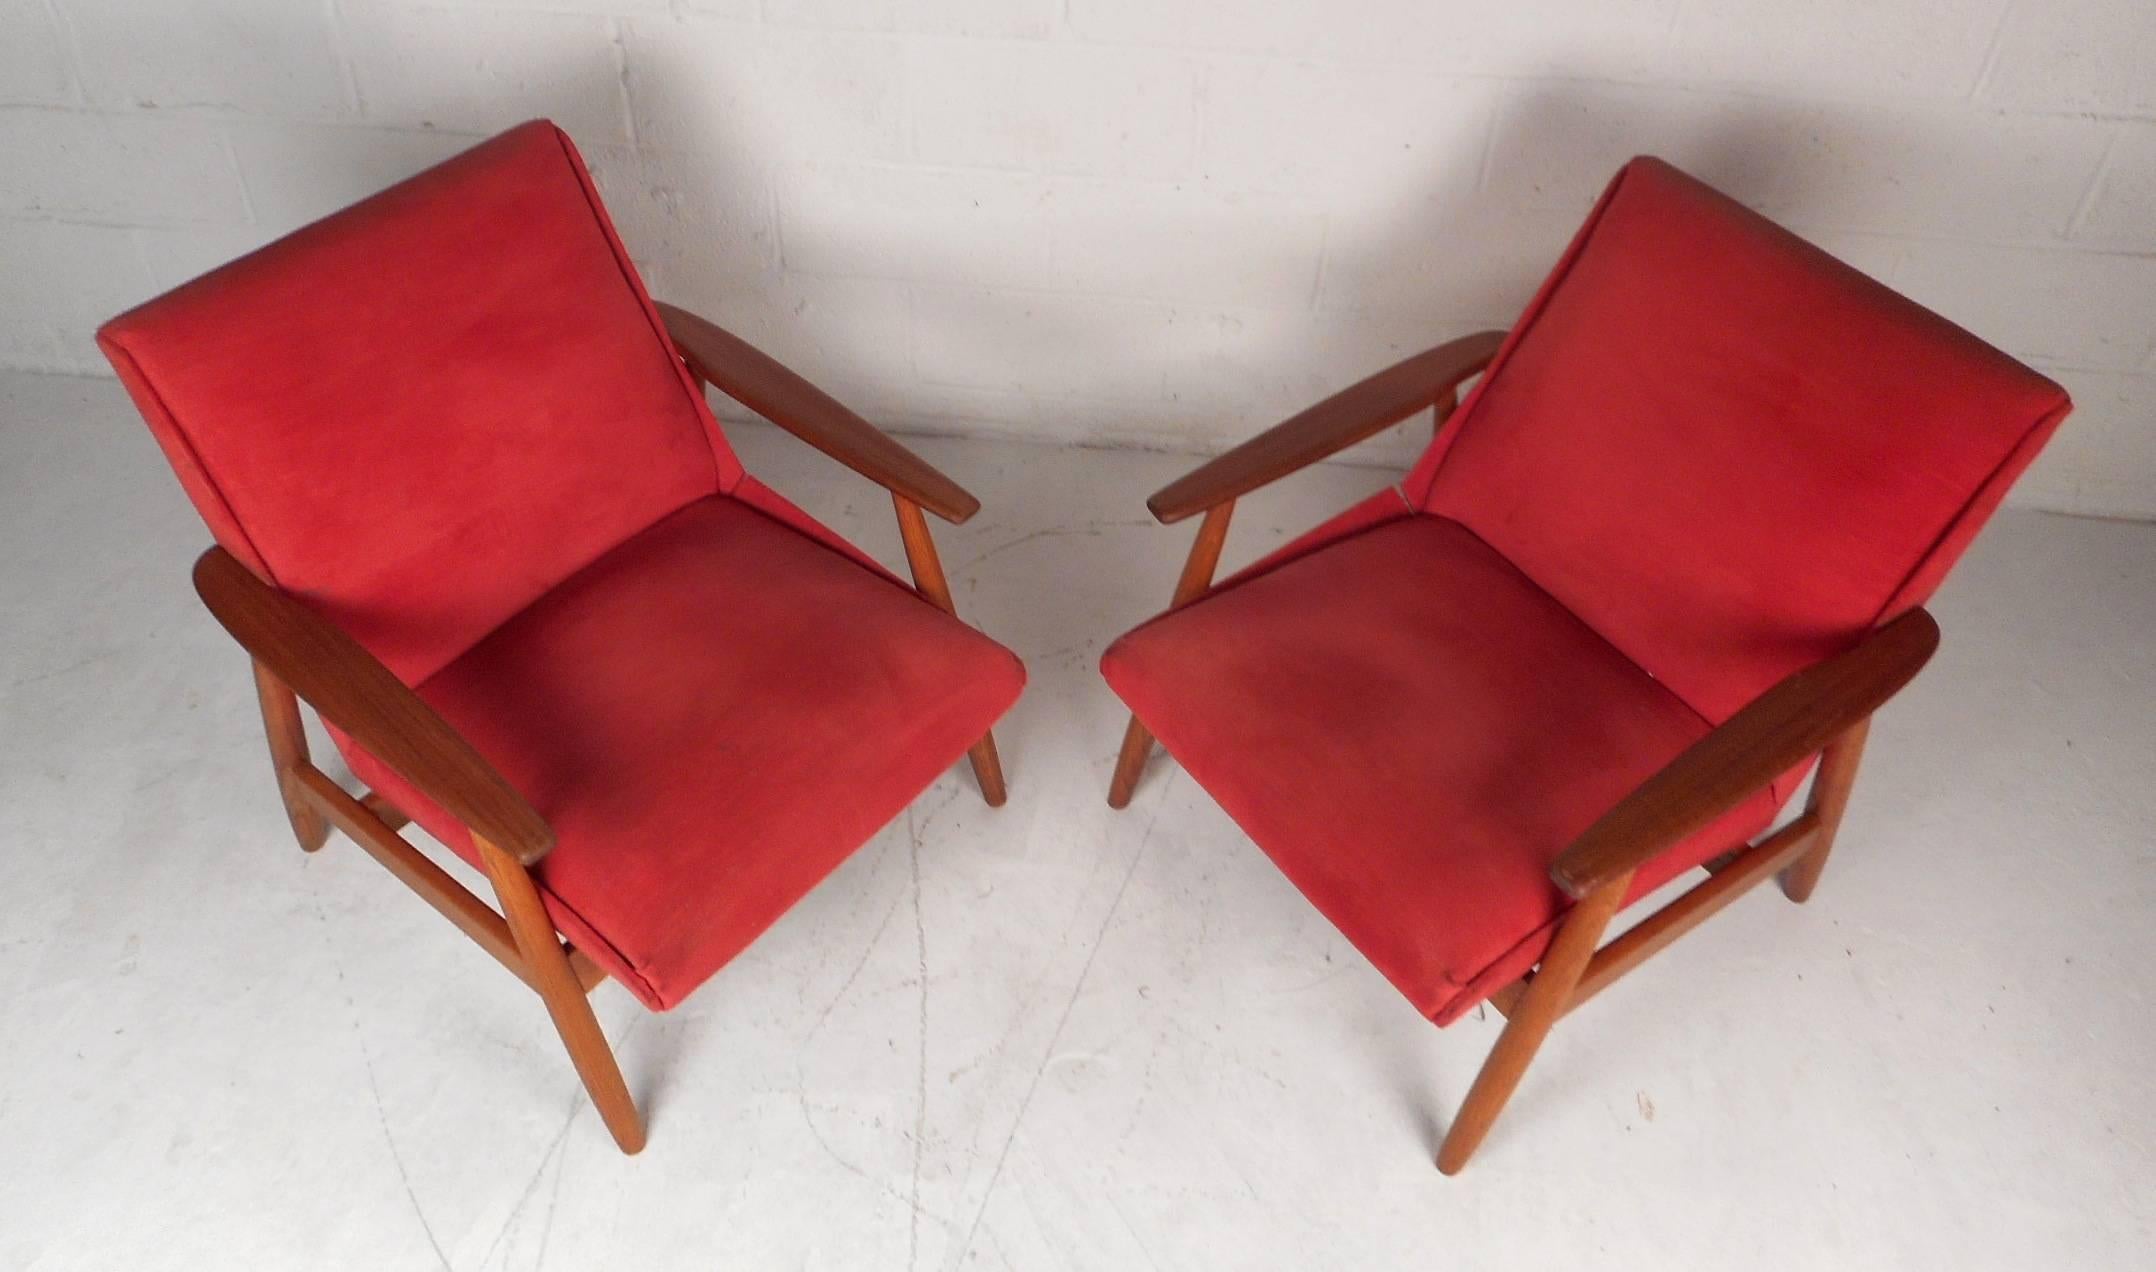 This beautiful pair of vintage modern lounge chairs feature a solid walnut frame with thick padded seating. Stylish design with angled and tapered legs adding to the midcentury appeal. This lovely pair is upholstered in plush red fabric and has